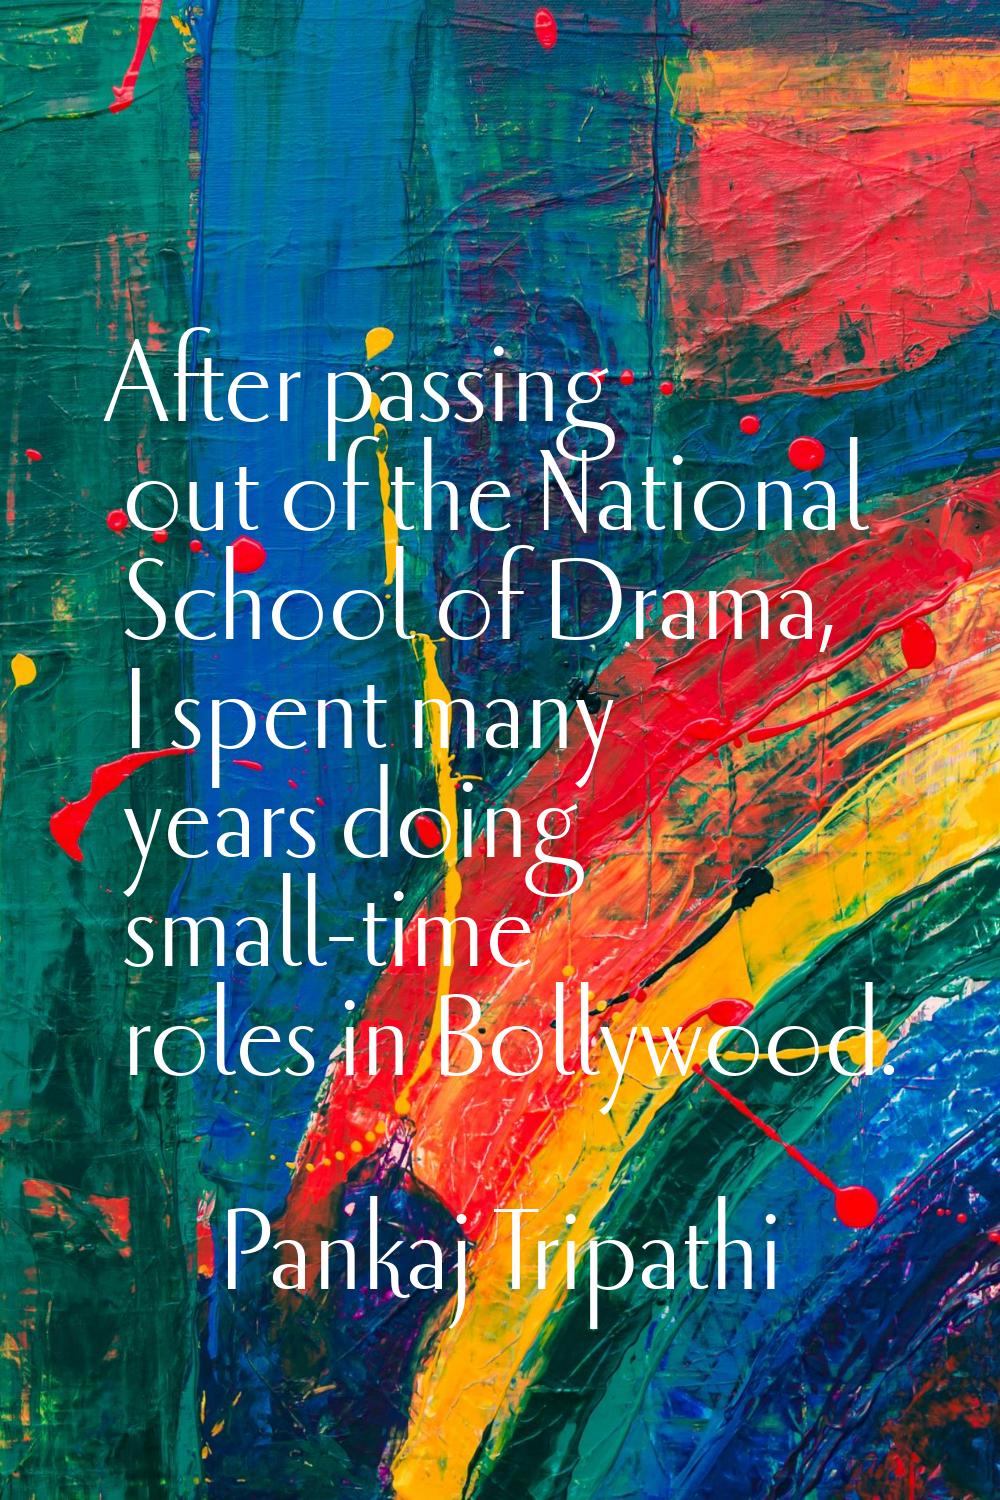 After passing out of the National School of Drama, I spent many years doing small-time roles in Bol